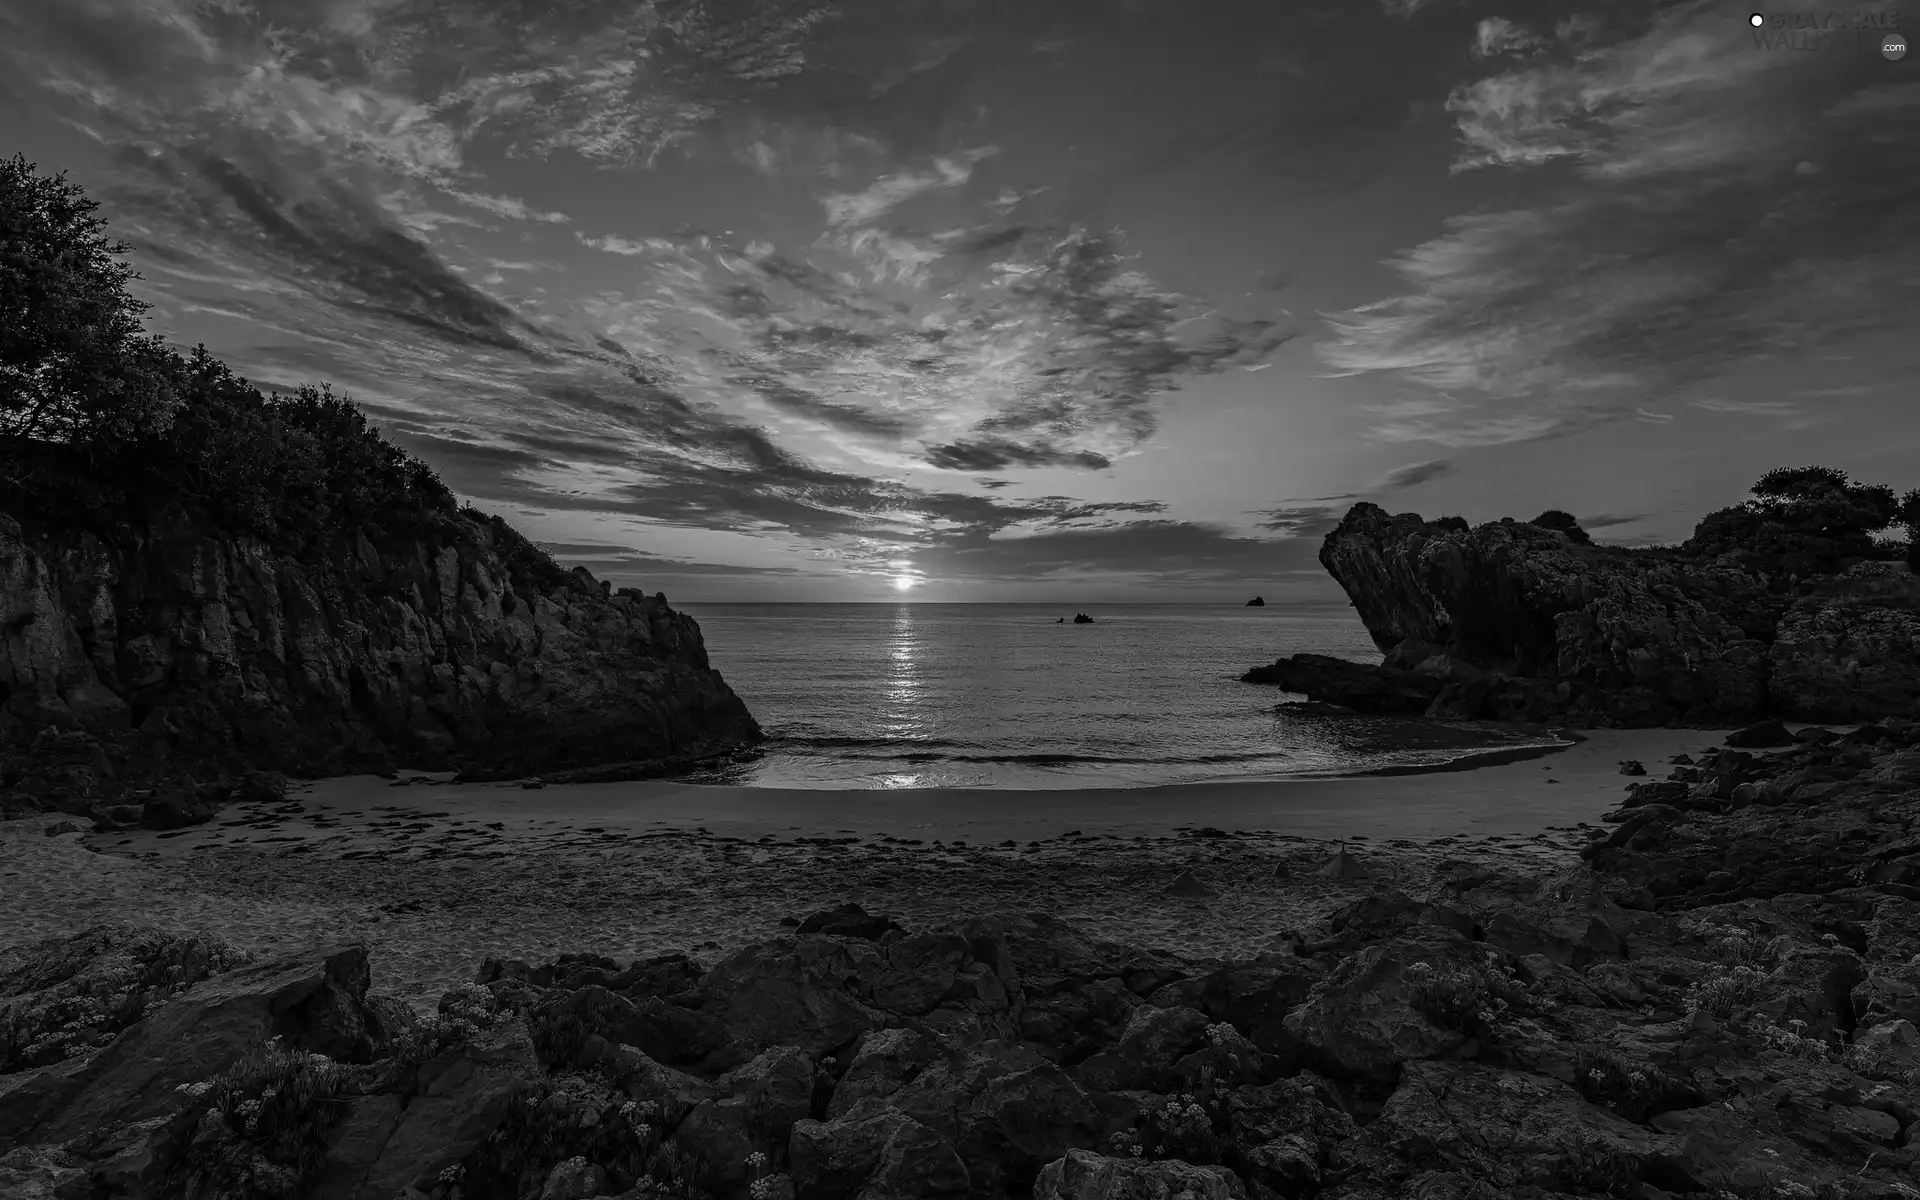 viewes, Beaches, rocks, Great Sunsets, Stones, sea, Sand, reflection, clouds, trees